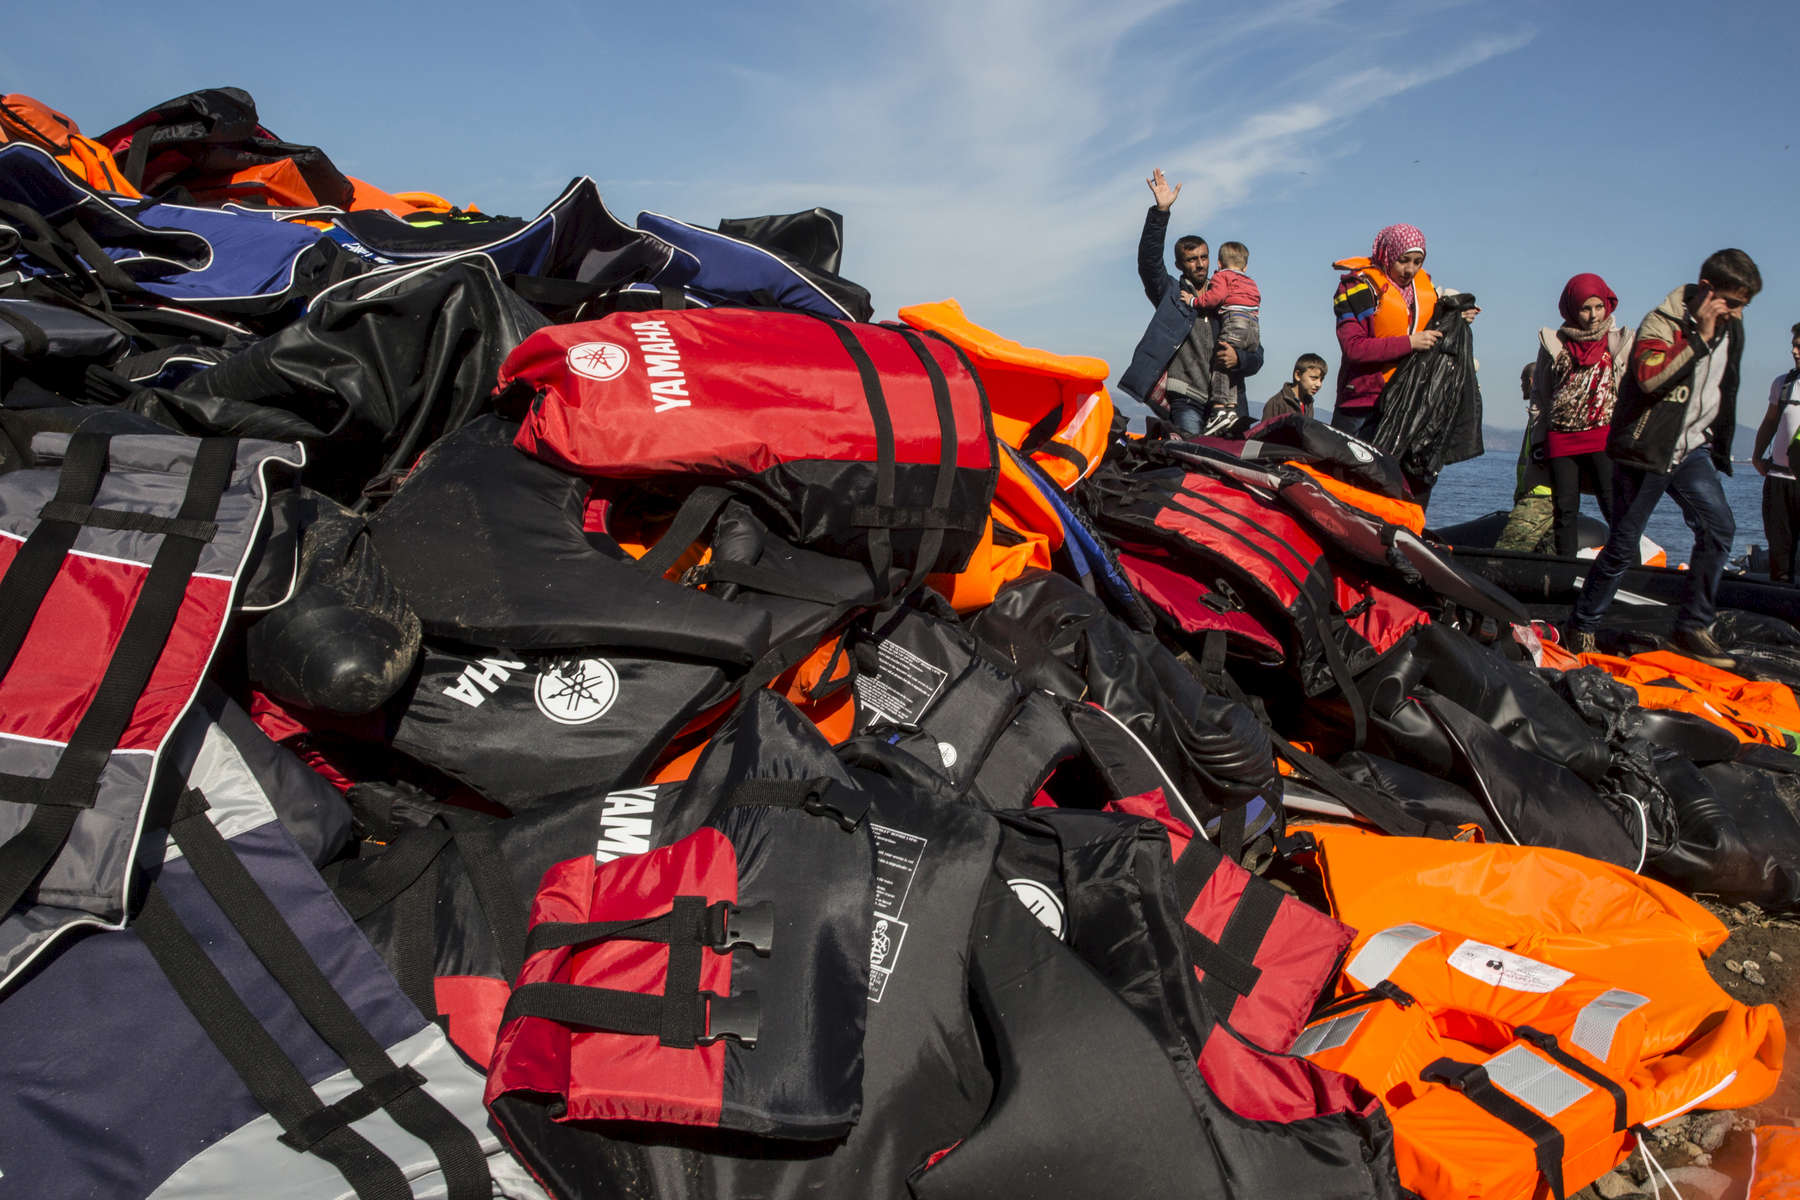 LESBOS, GREECE - OCTOBER 26: Lifejackets are seen everywhere another raft lands filled with more refugees from Turkey. Colder weather and rough seas continue to cause deaths at sea as thousands travel in overcrowded small rafts. According to the IOM, an estimated 100,000 people landed in Greece, an average of almost 4,500 per day in late October and November. Nearly all of those entering Greece on a boat from Turkey are from the war zones of Syria, Iraq and Afghanistan. (Photo by Paula Bronstein)